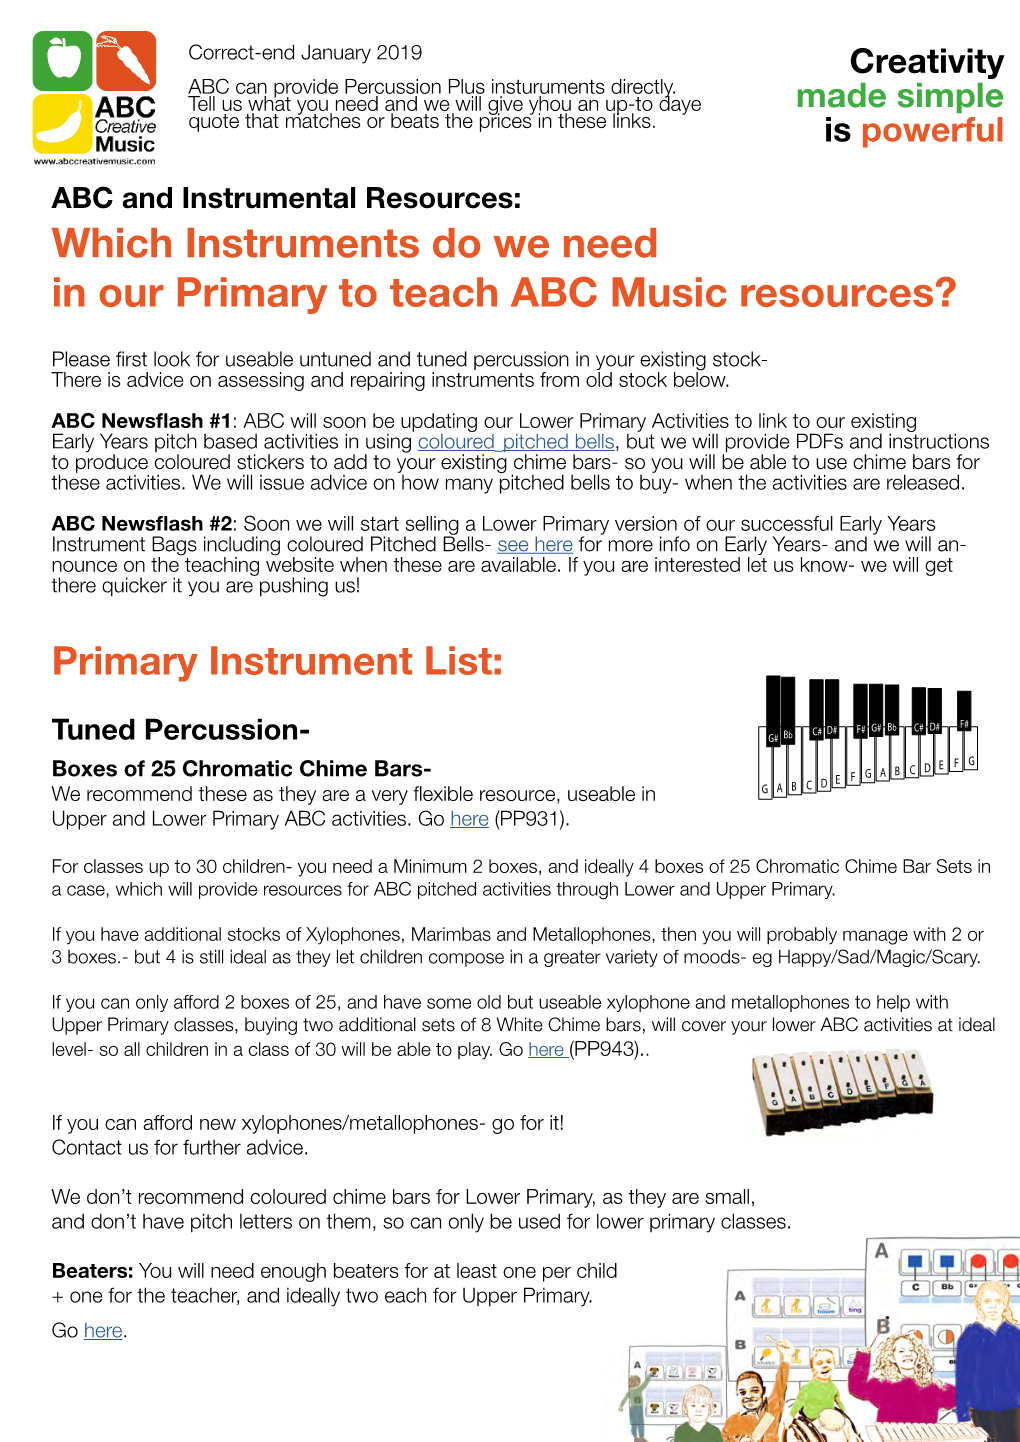 Which Instruments Do We Need in Our Primary to Teach ABC Music Resources?